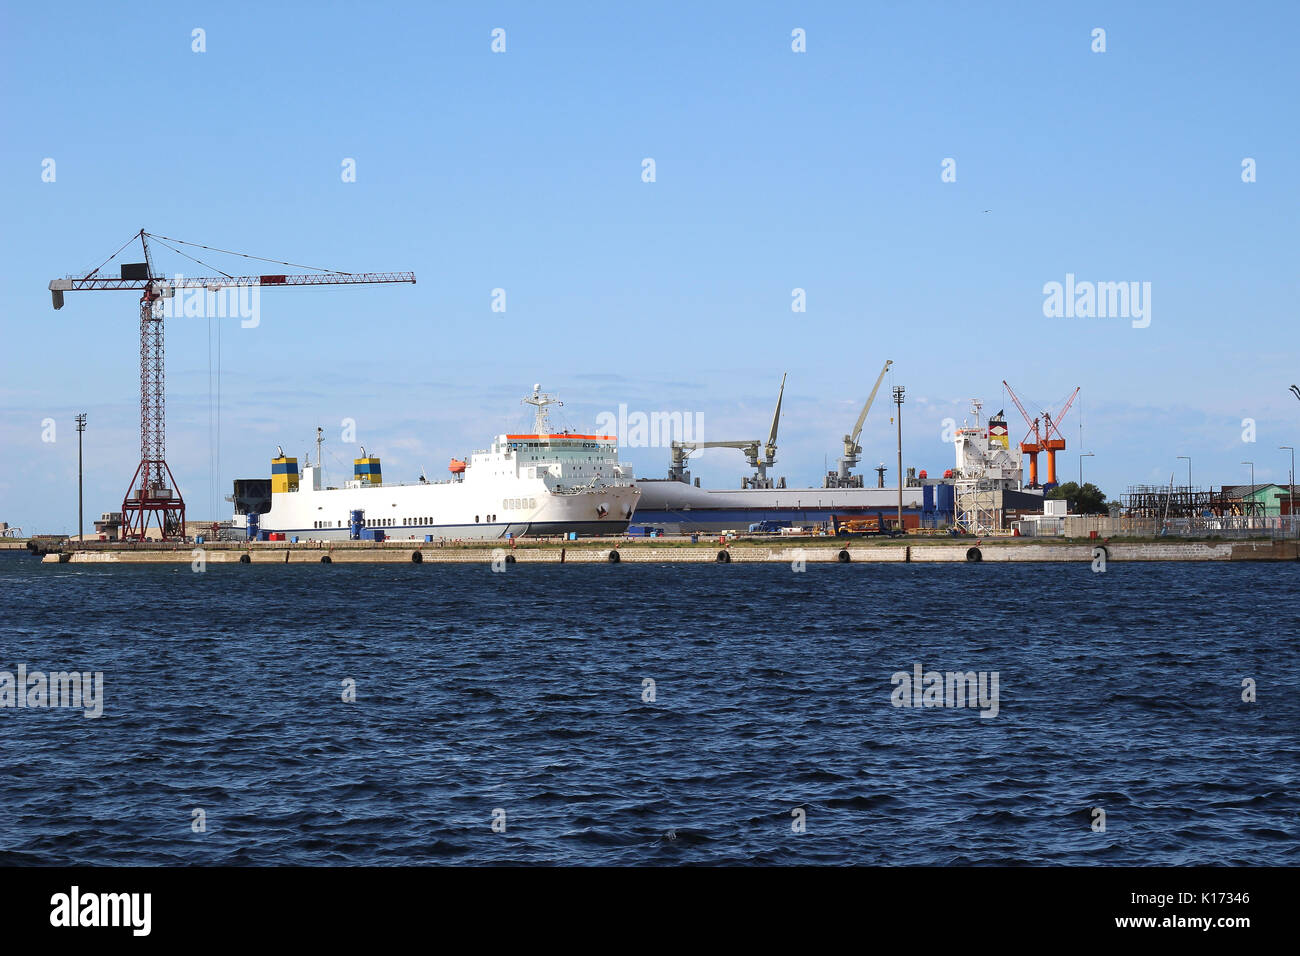 A cargo ship docked at the port of Dunkirk occupied to be loaded by cranes Stock Photo